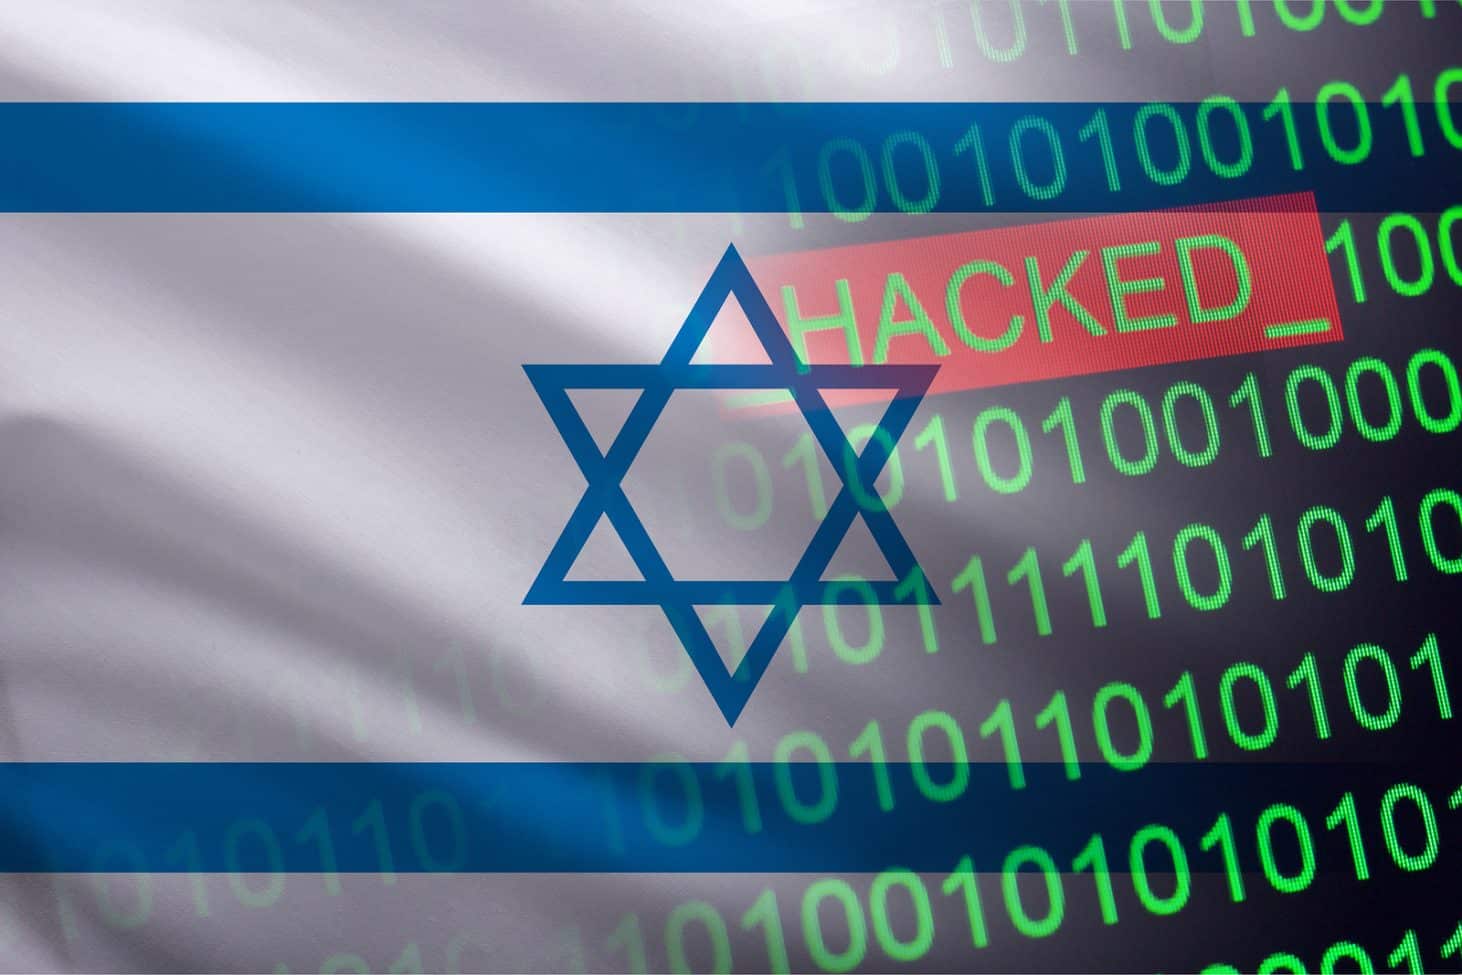 Attack israel cyber Iran state